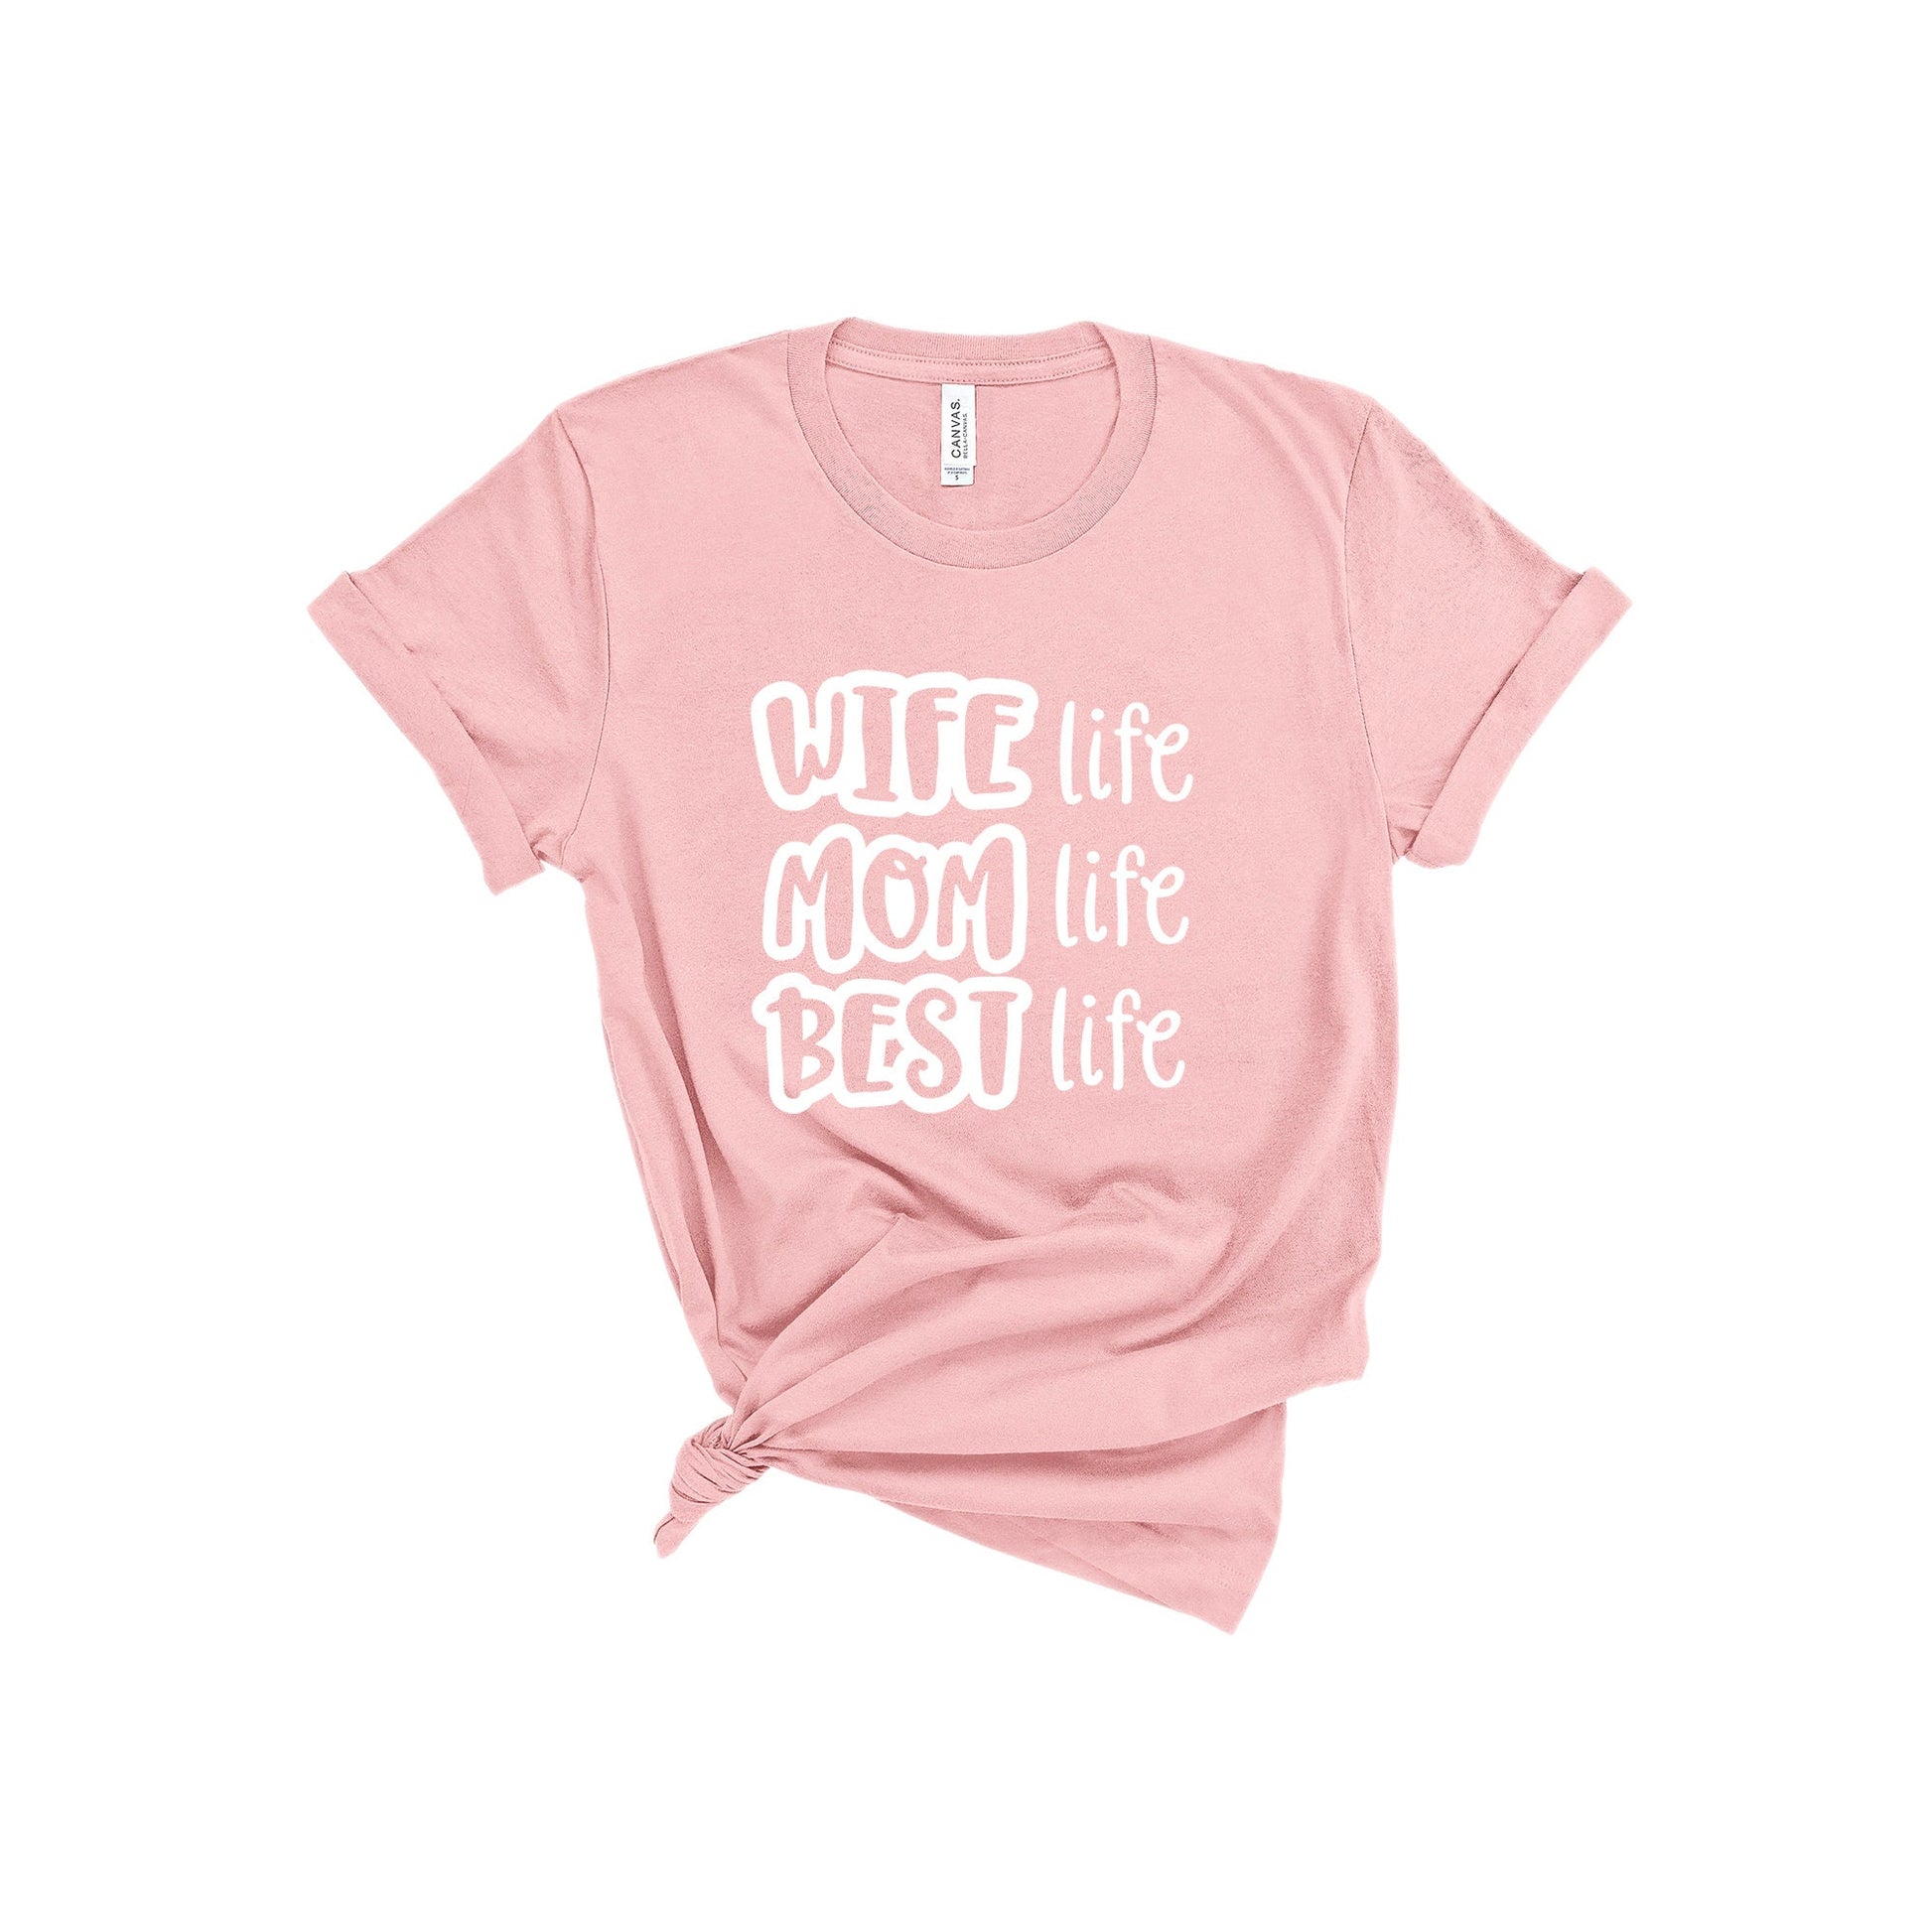 Mother's Day Gift, Gifts for Her, Mom Shirts, Mom-life Shirt, Shirts for Moms, Trendy Mom T-Shirts, Cool Mom Shirts, Shirts for Moms